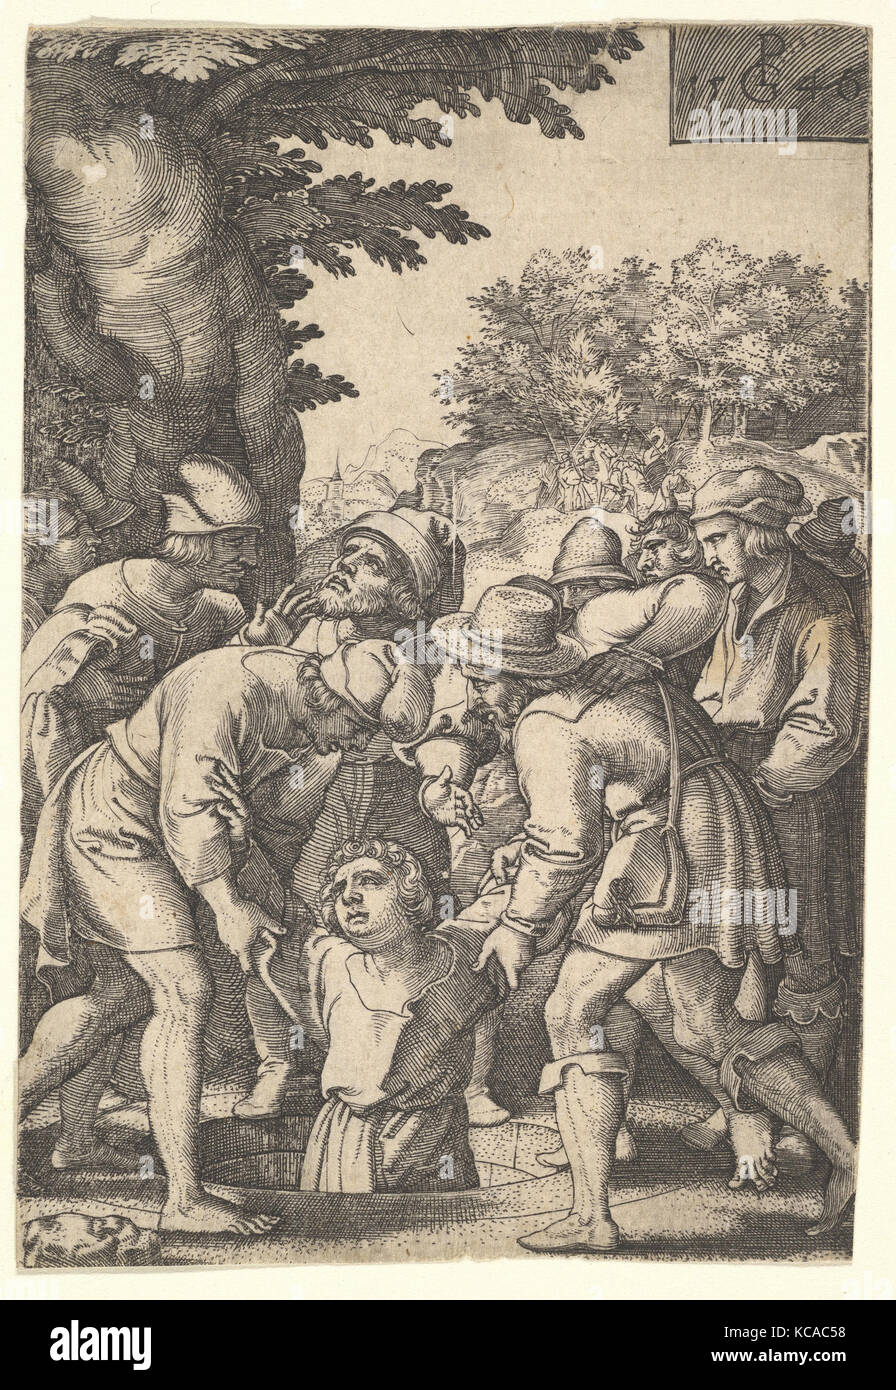 Joseph lowered into a well by his brothers, from the series 'The Story of Joseph', Georg Pencz, 1546 Stock Photo